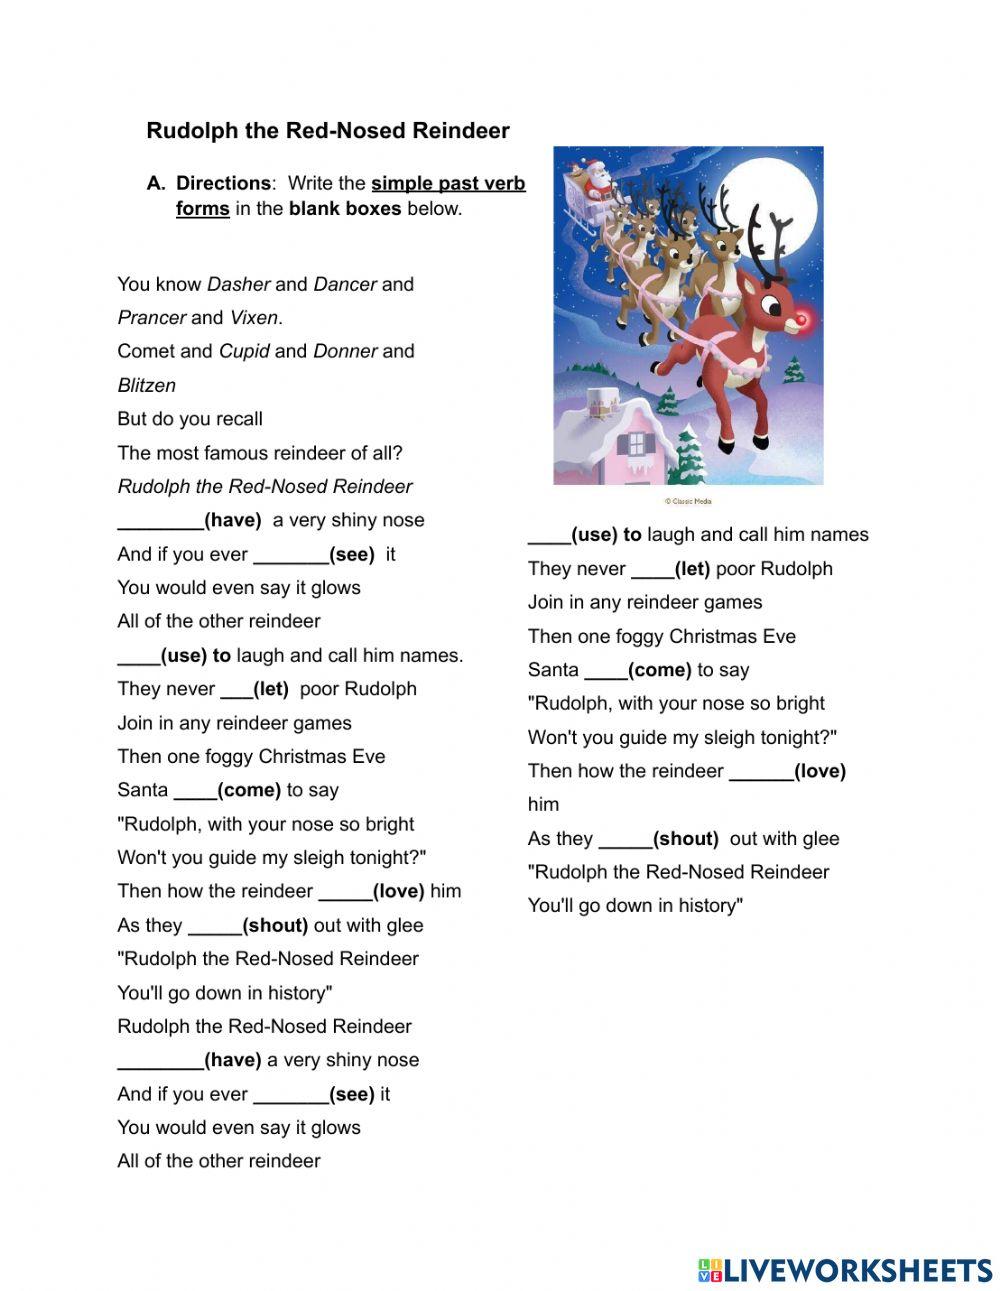 Rudolph the red-nosed reindeer- past tense song 2